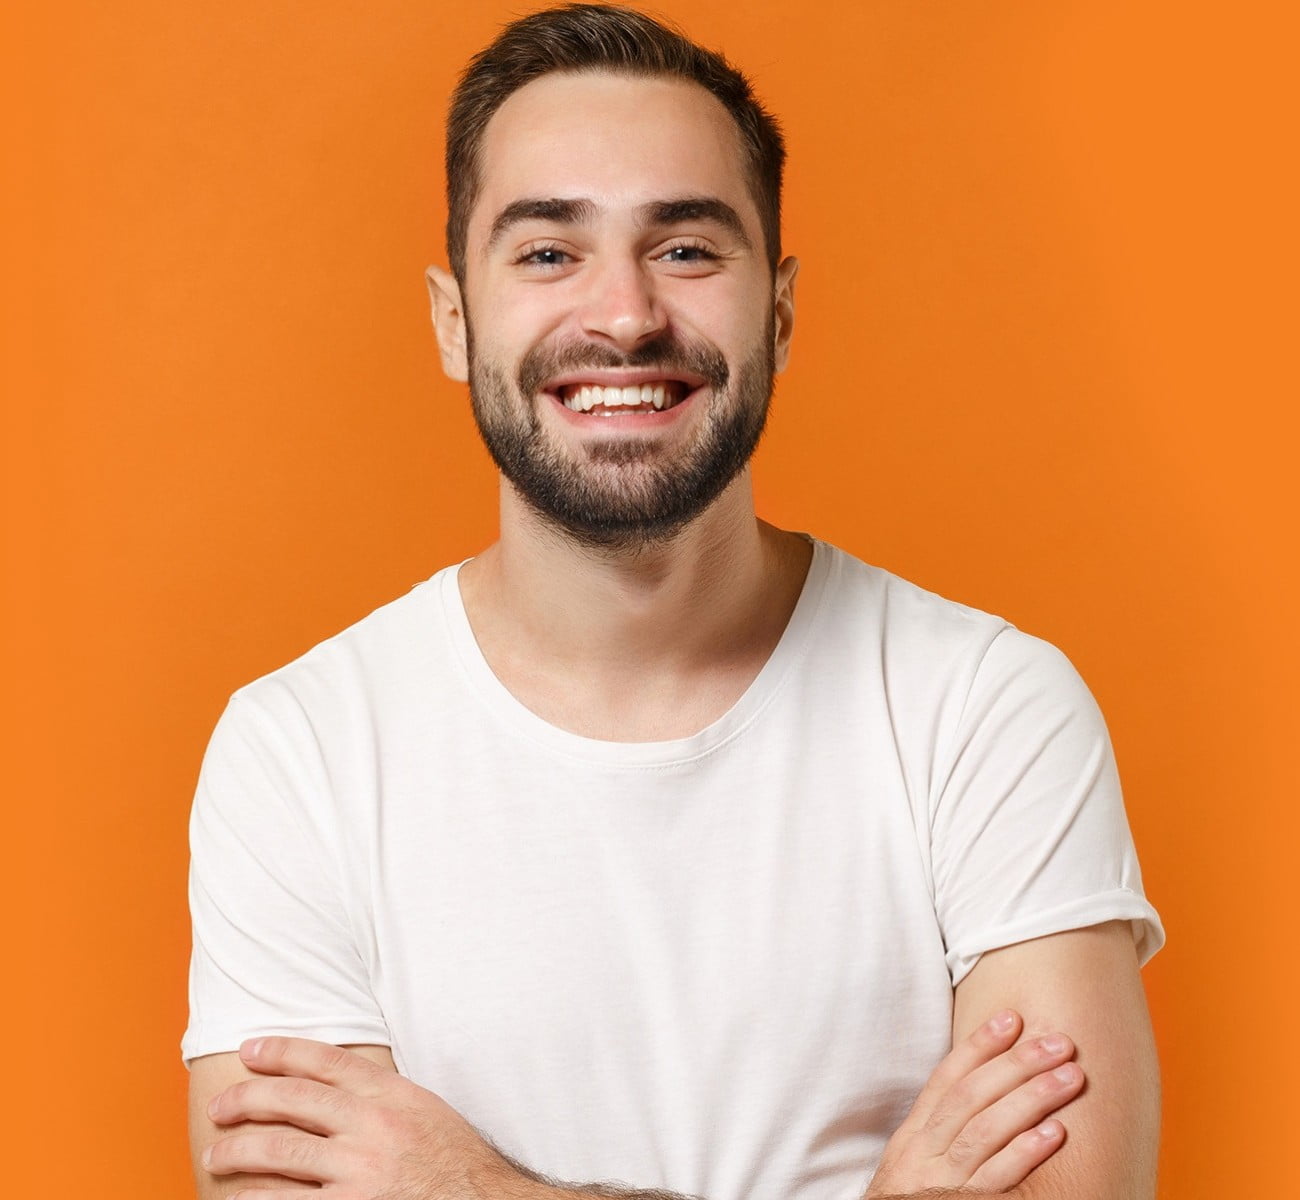 Smiling man with nice teeth and crossed arms on an orange background